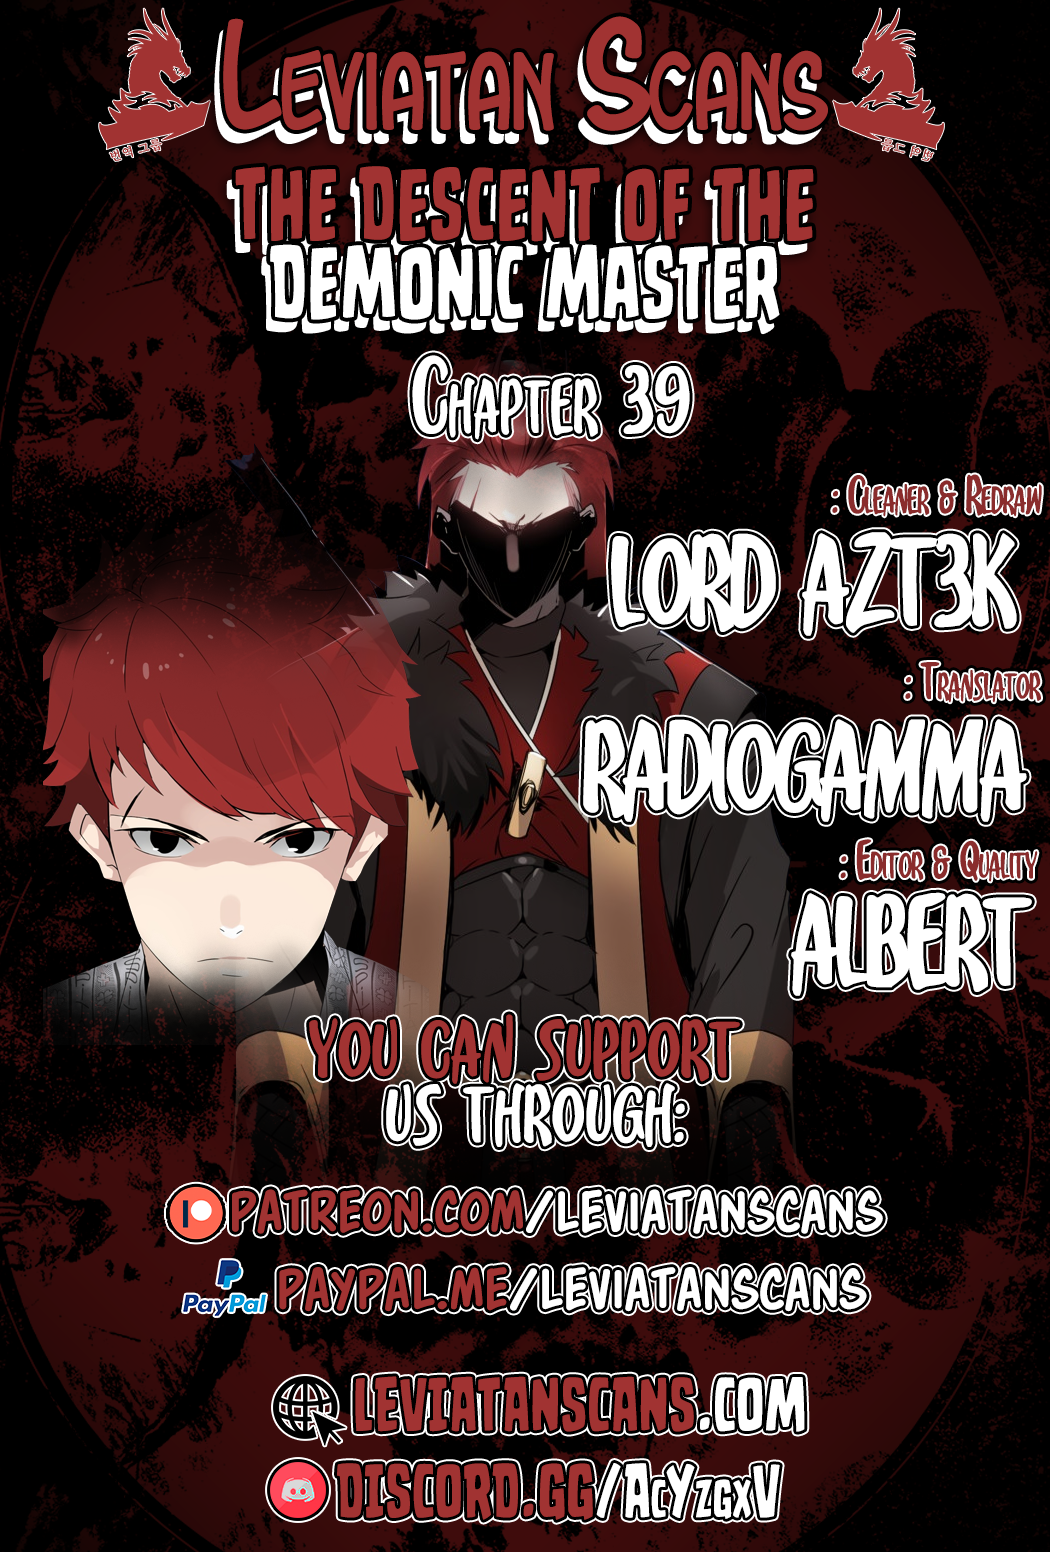 The Descent of the Demonic Master - Chapter 300 - Image 1